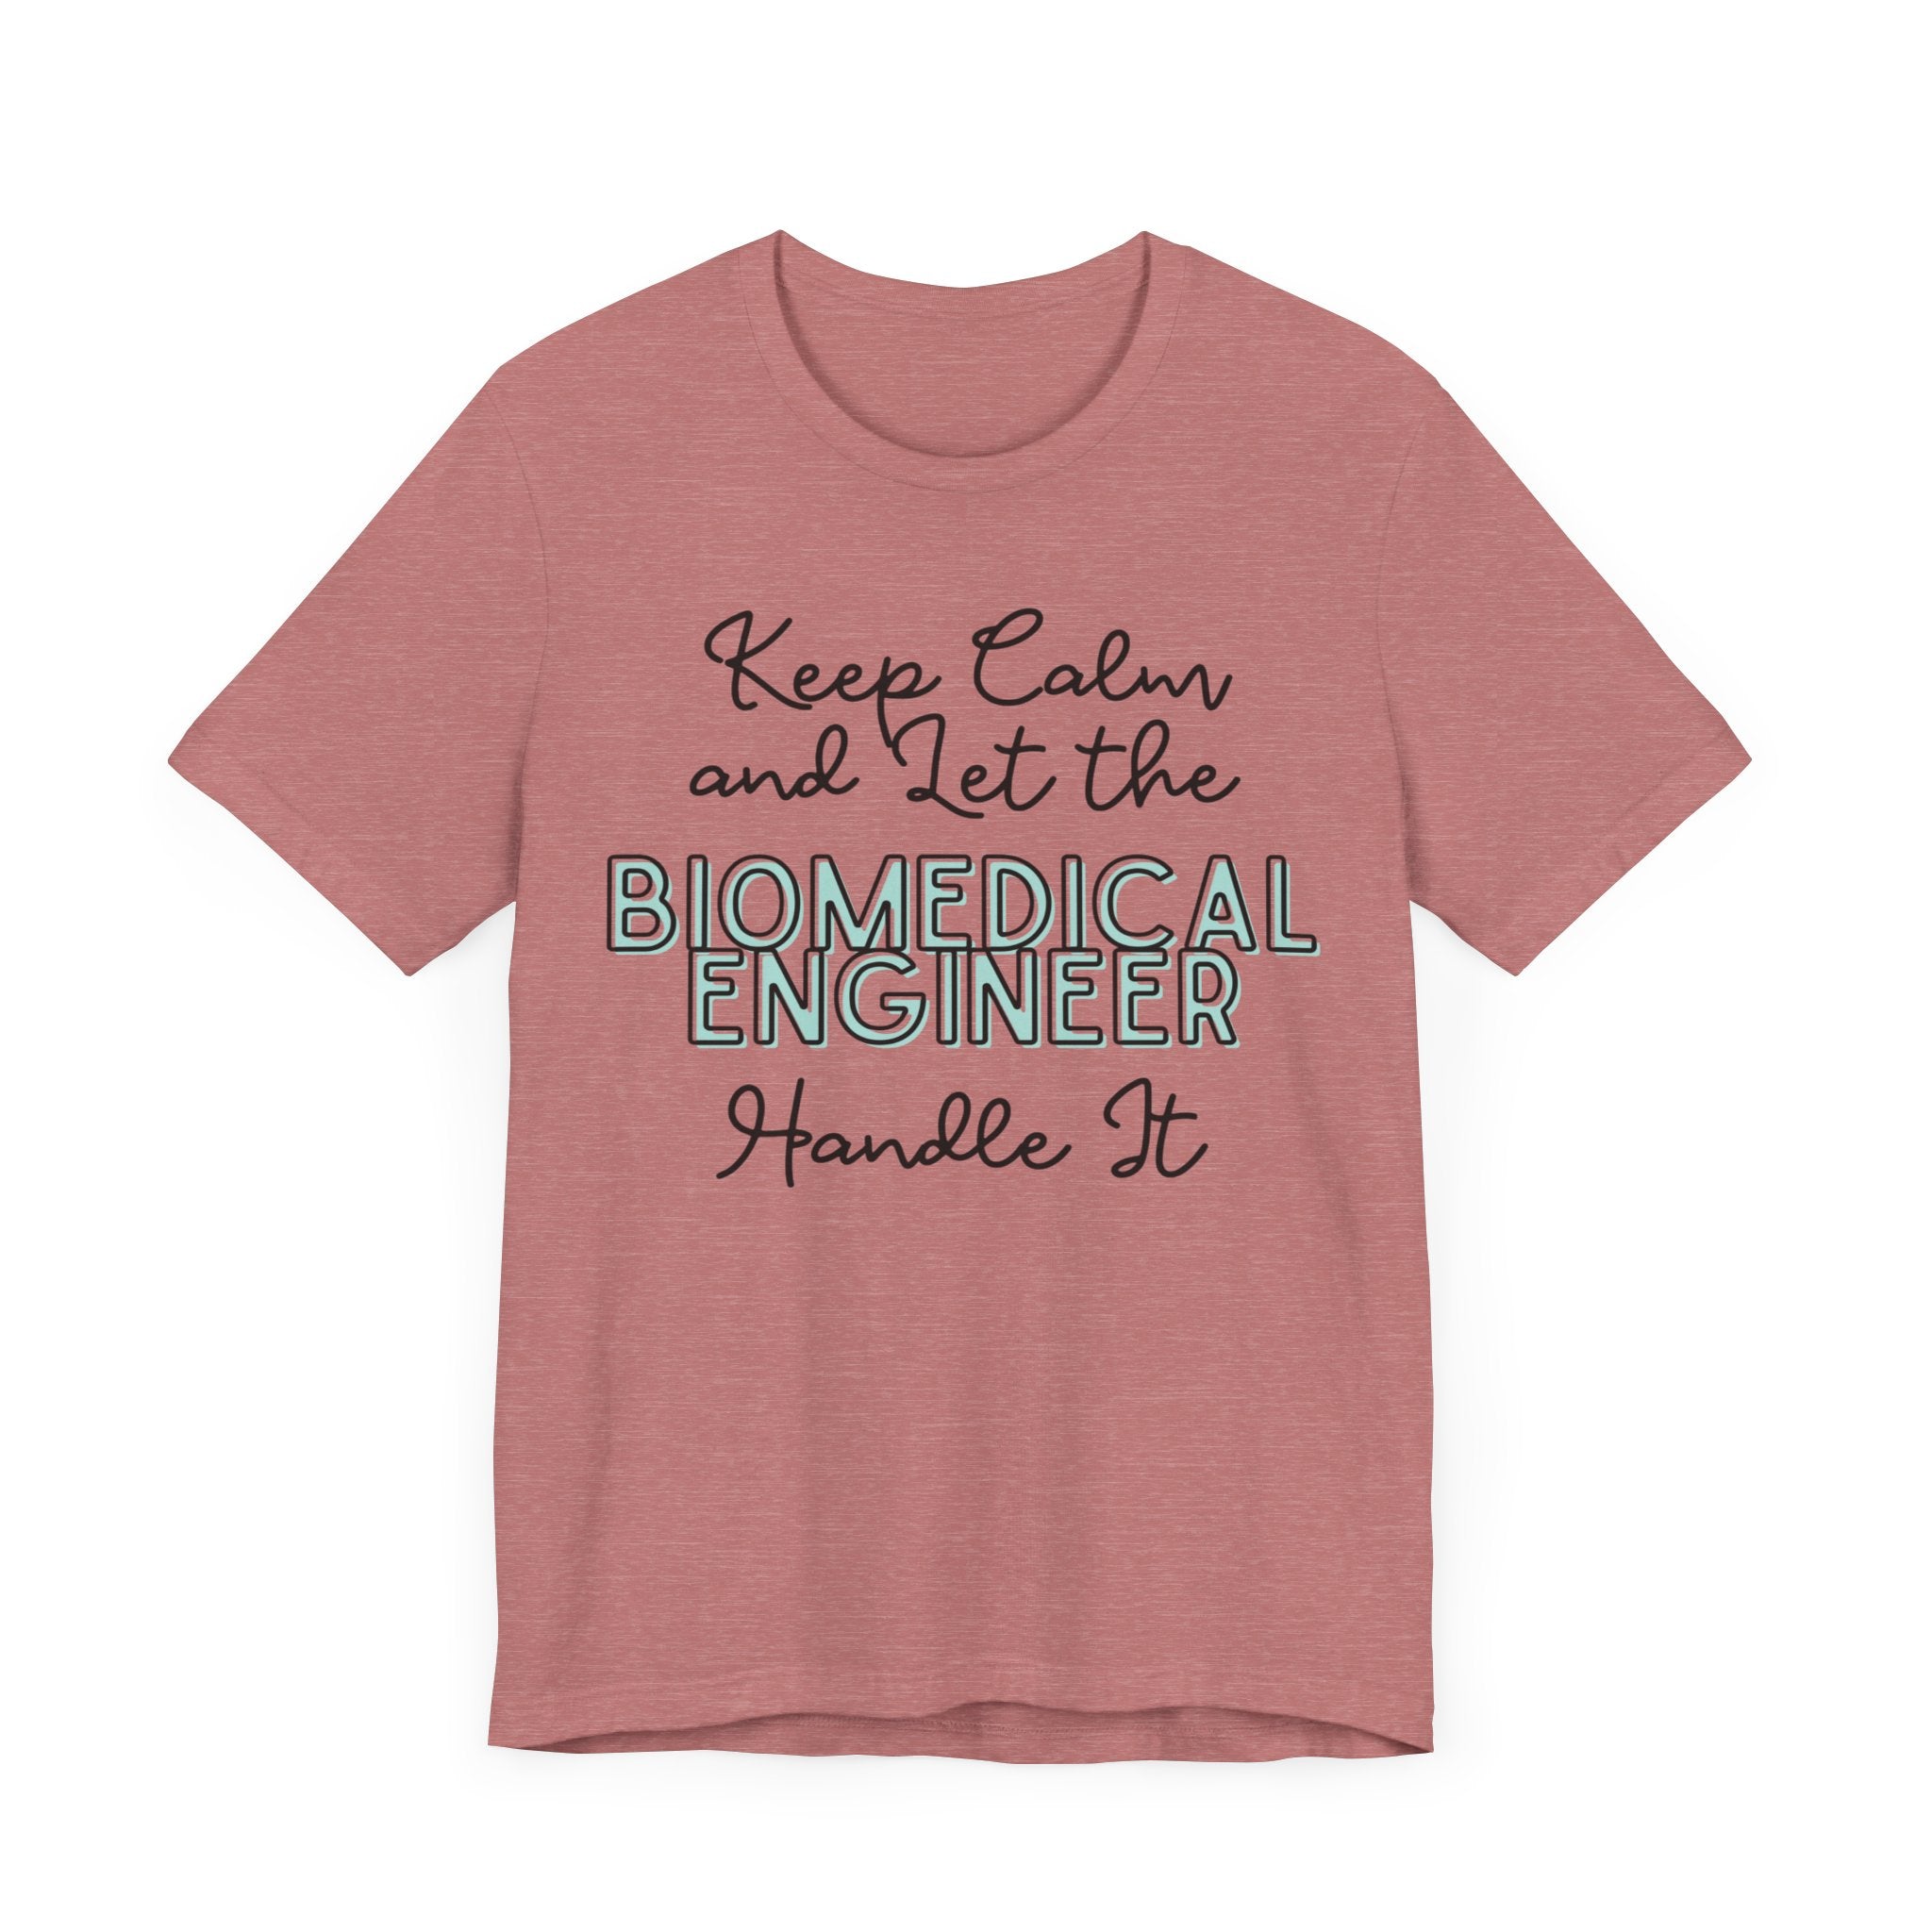 Keep Calm and let the Biomedical Engineer handle It - Jersey Short Sleeve Tee